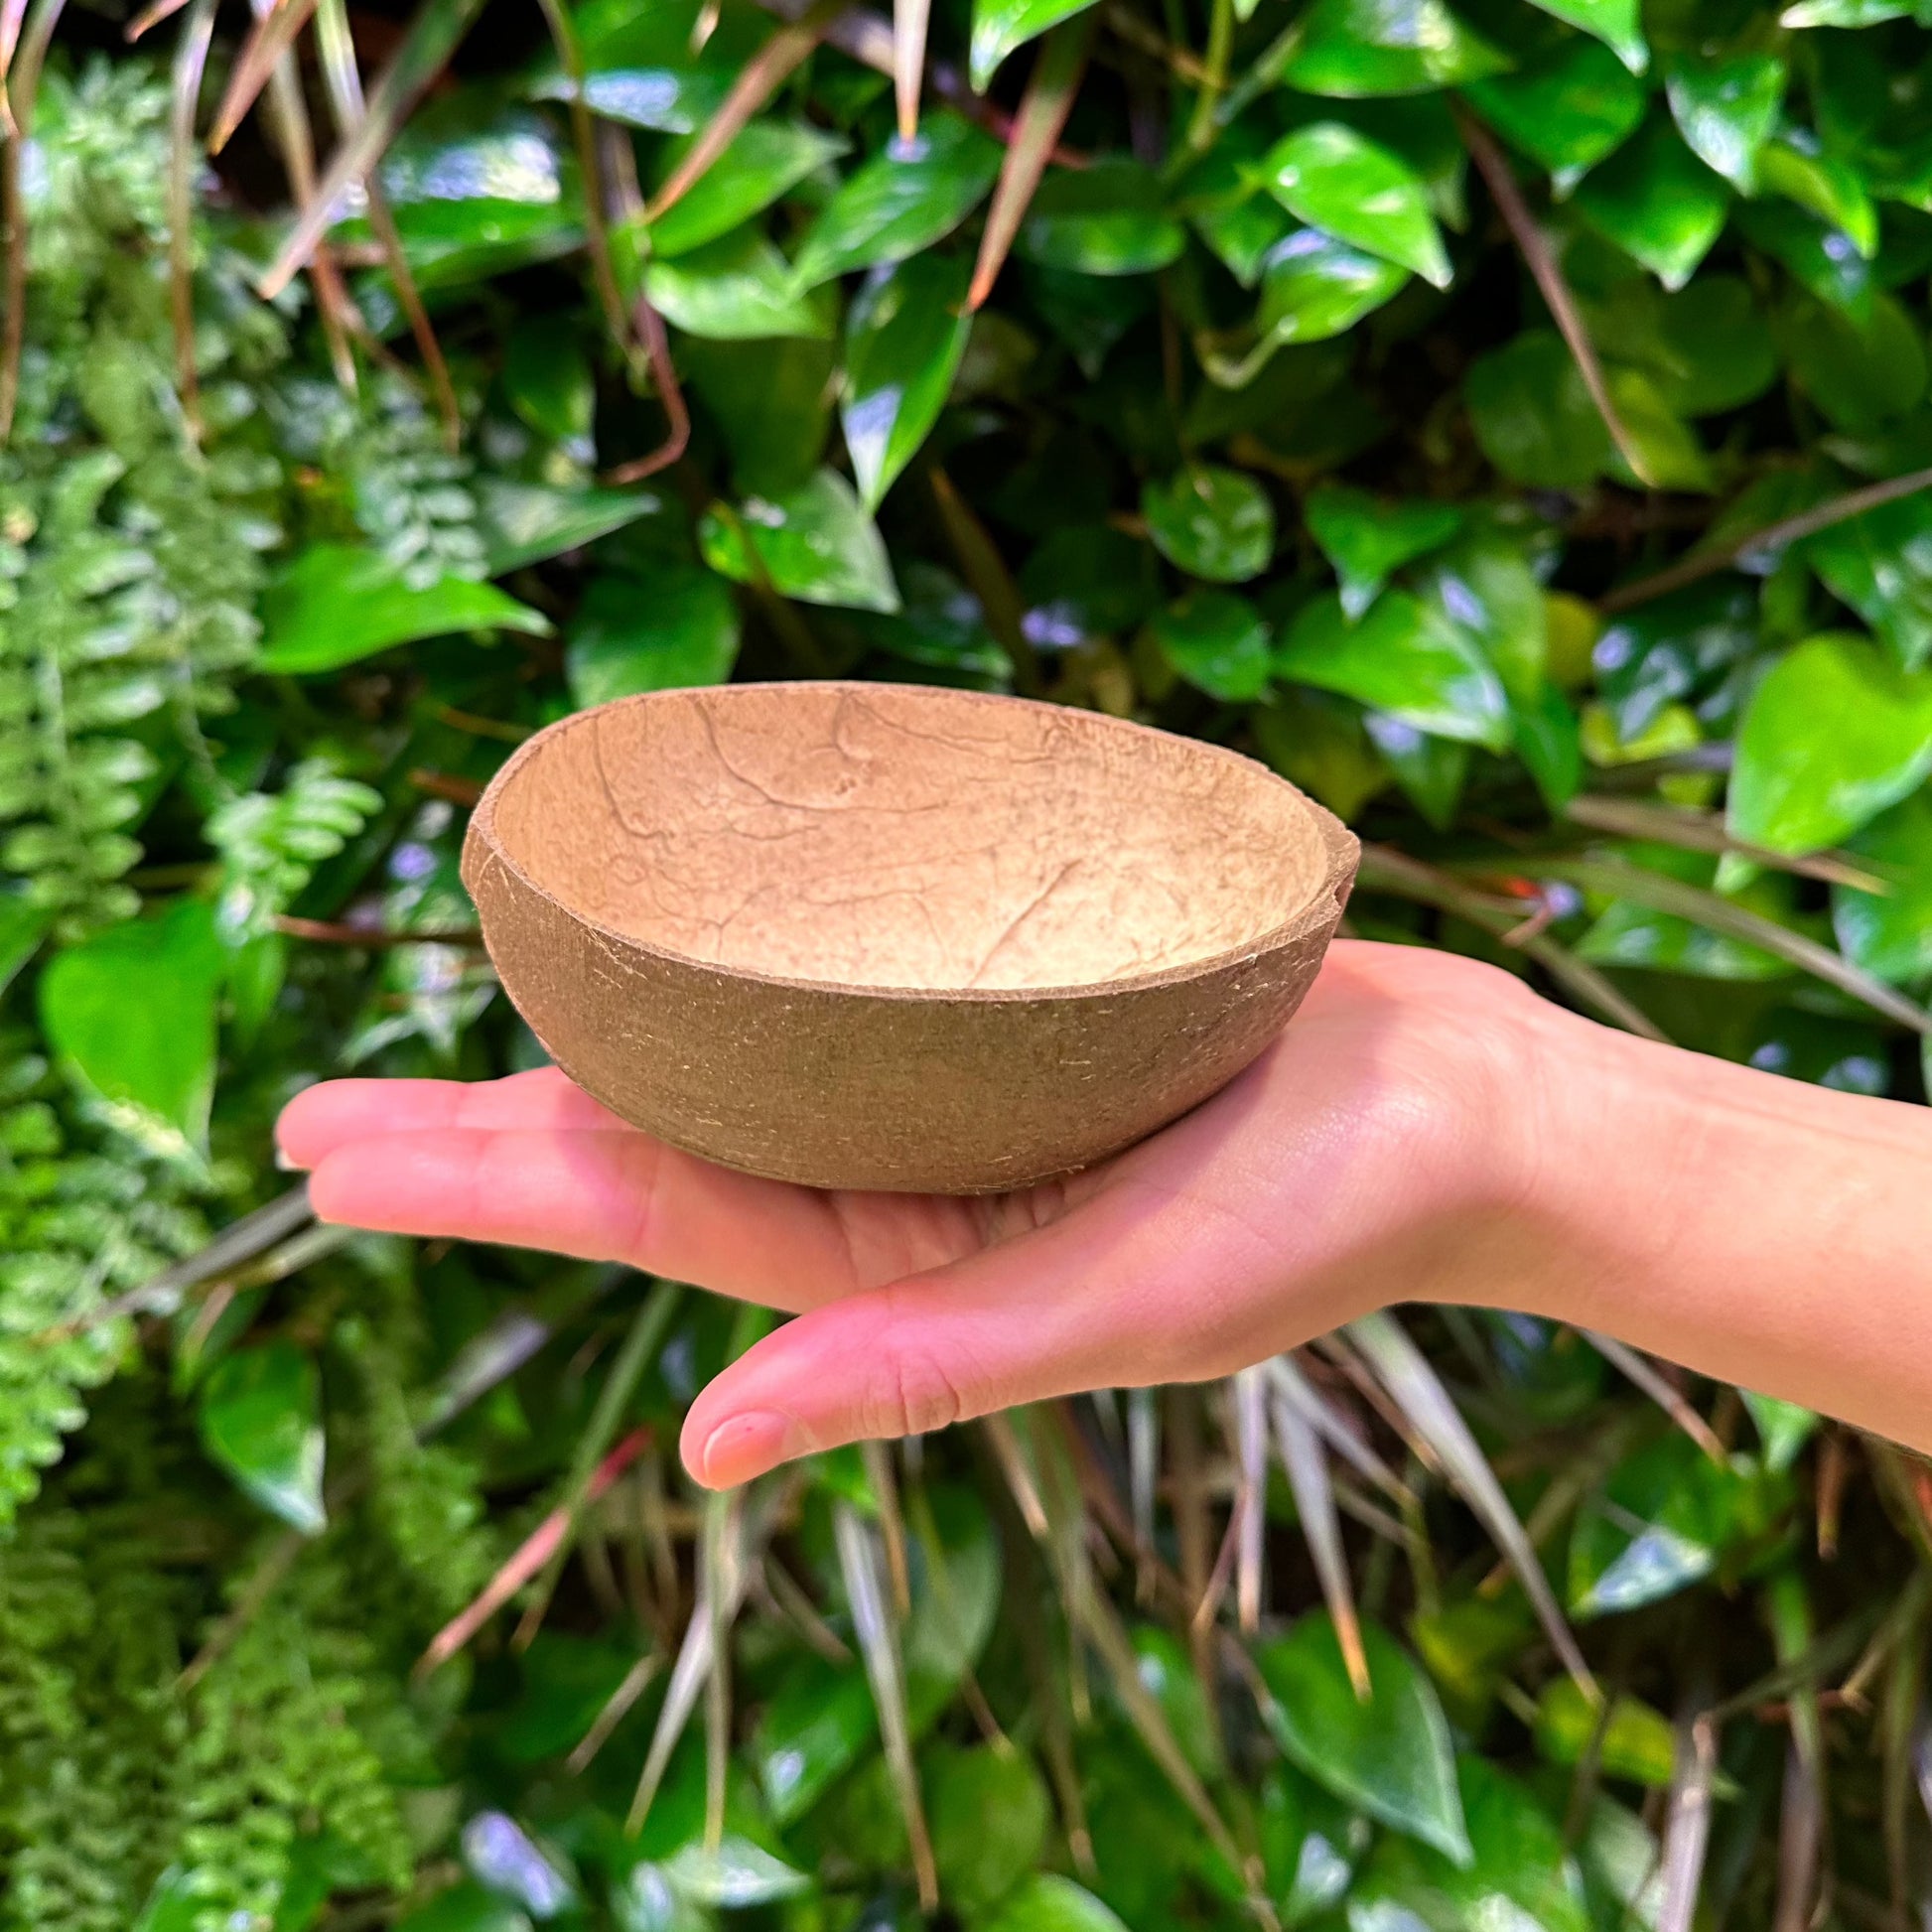 coconut oval bowl cup with hand for scale